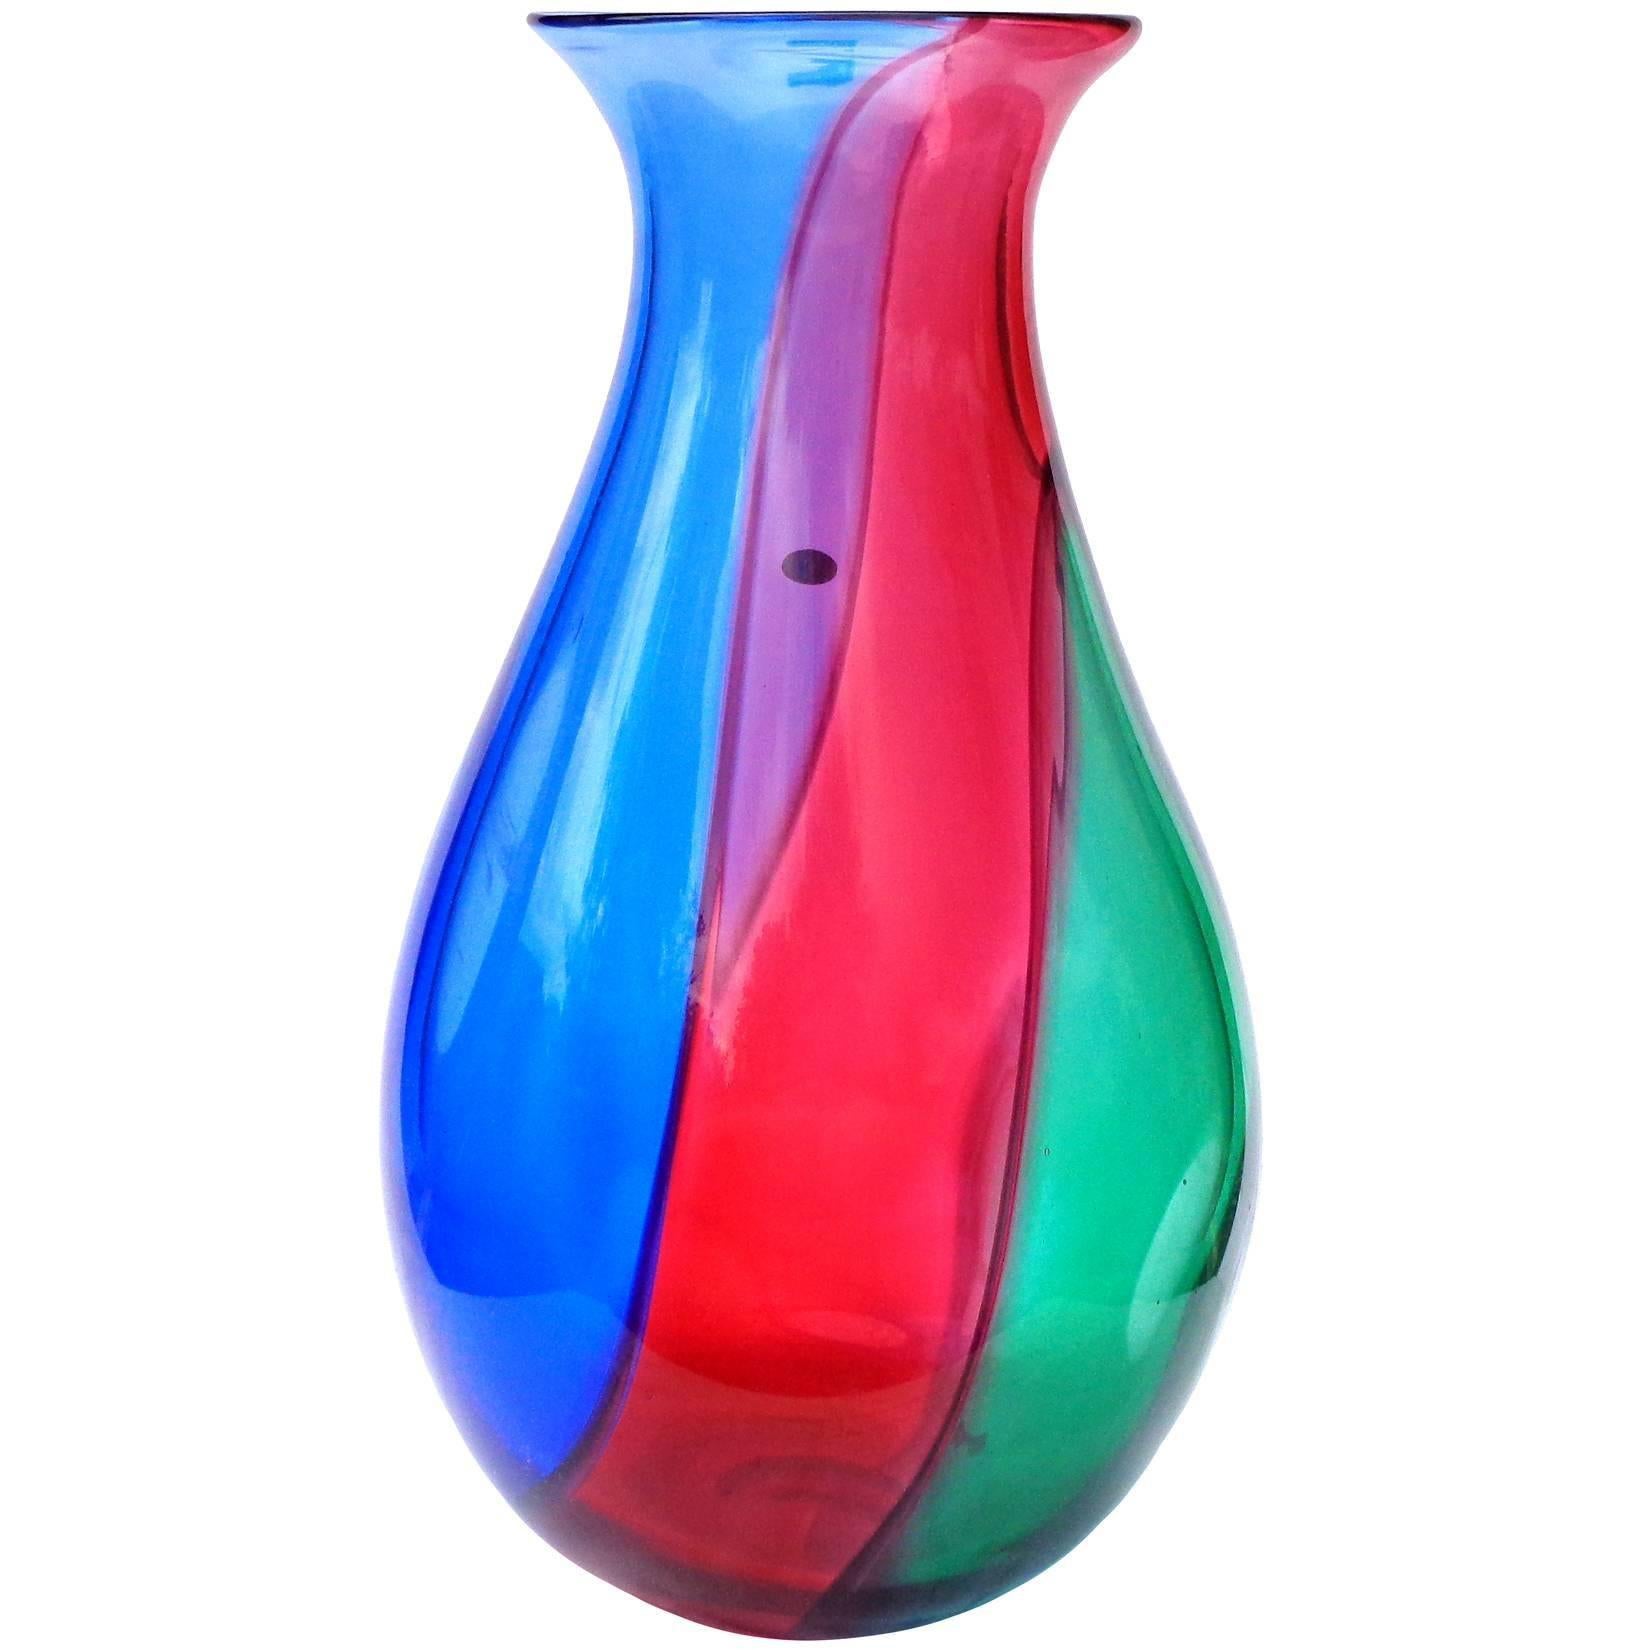 Archimede Seguso Signed Murano Blue Red Green Carnevale Italian Art Glass Vase In Good Condition For Sale In Kissimmee, FL